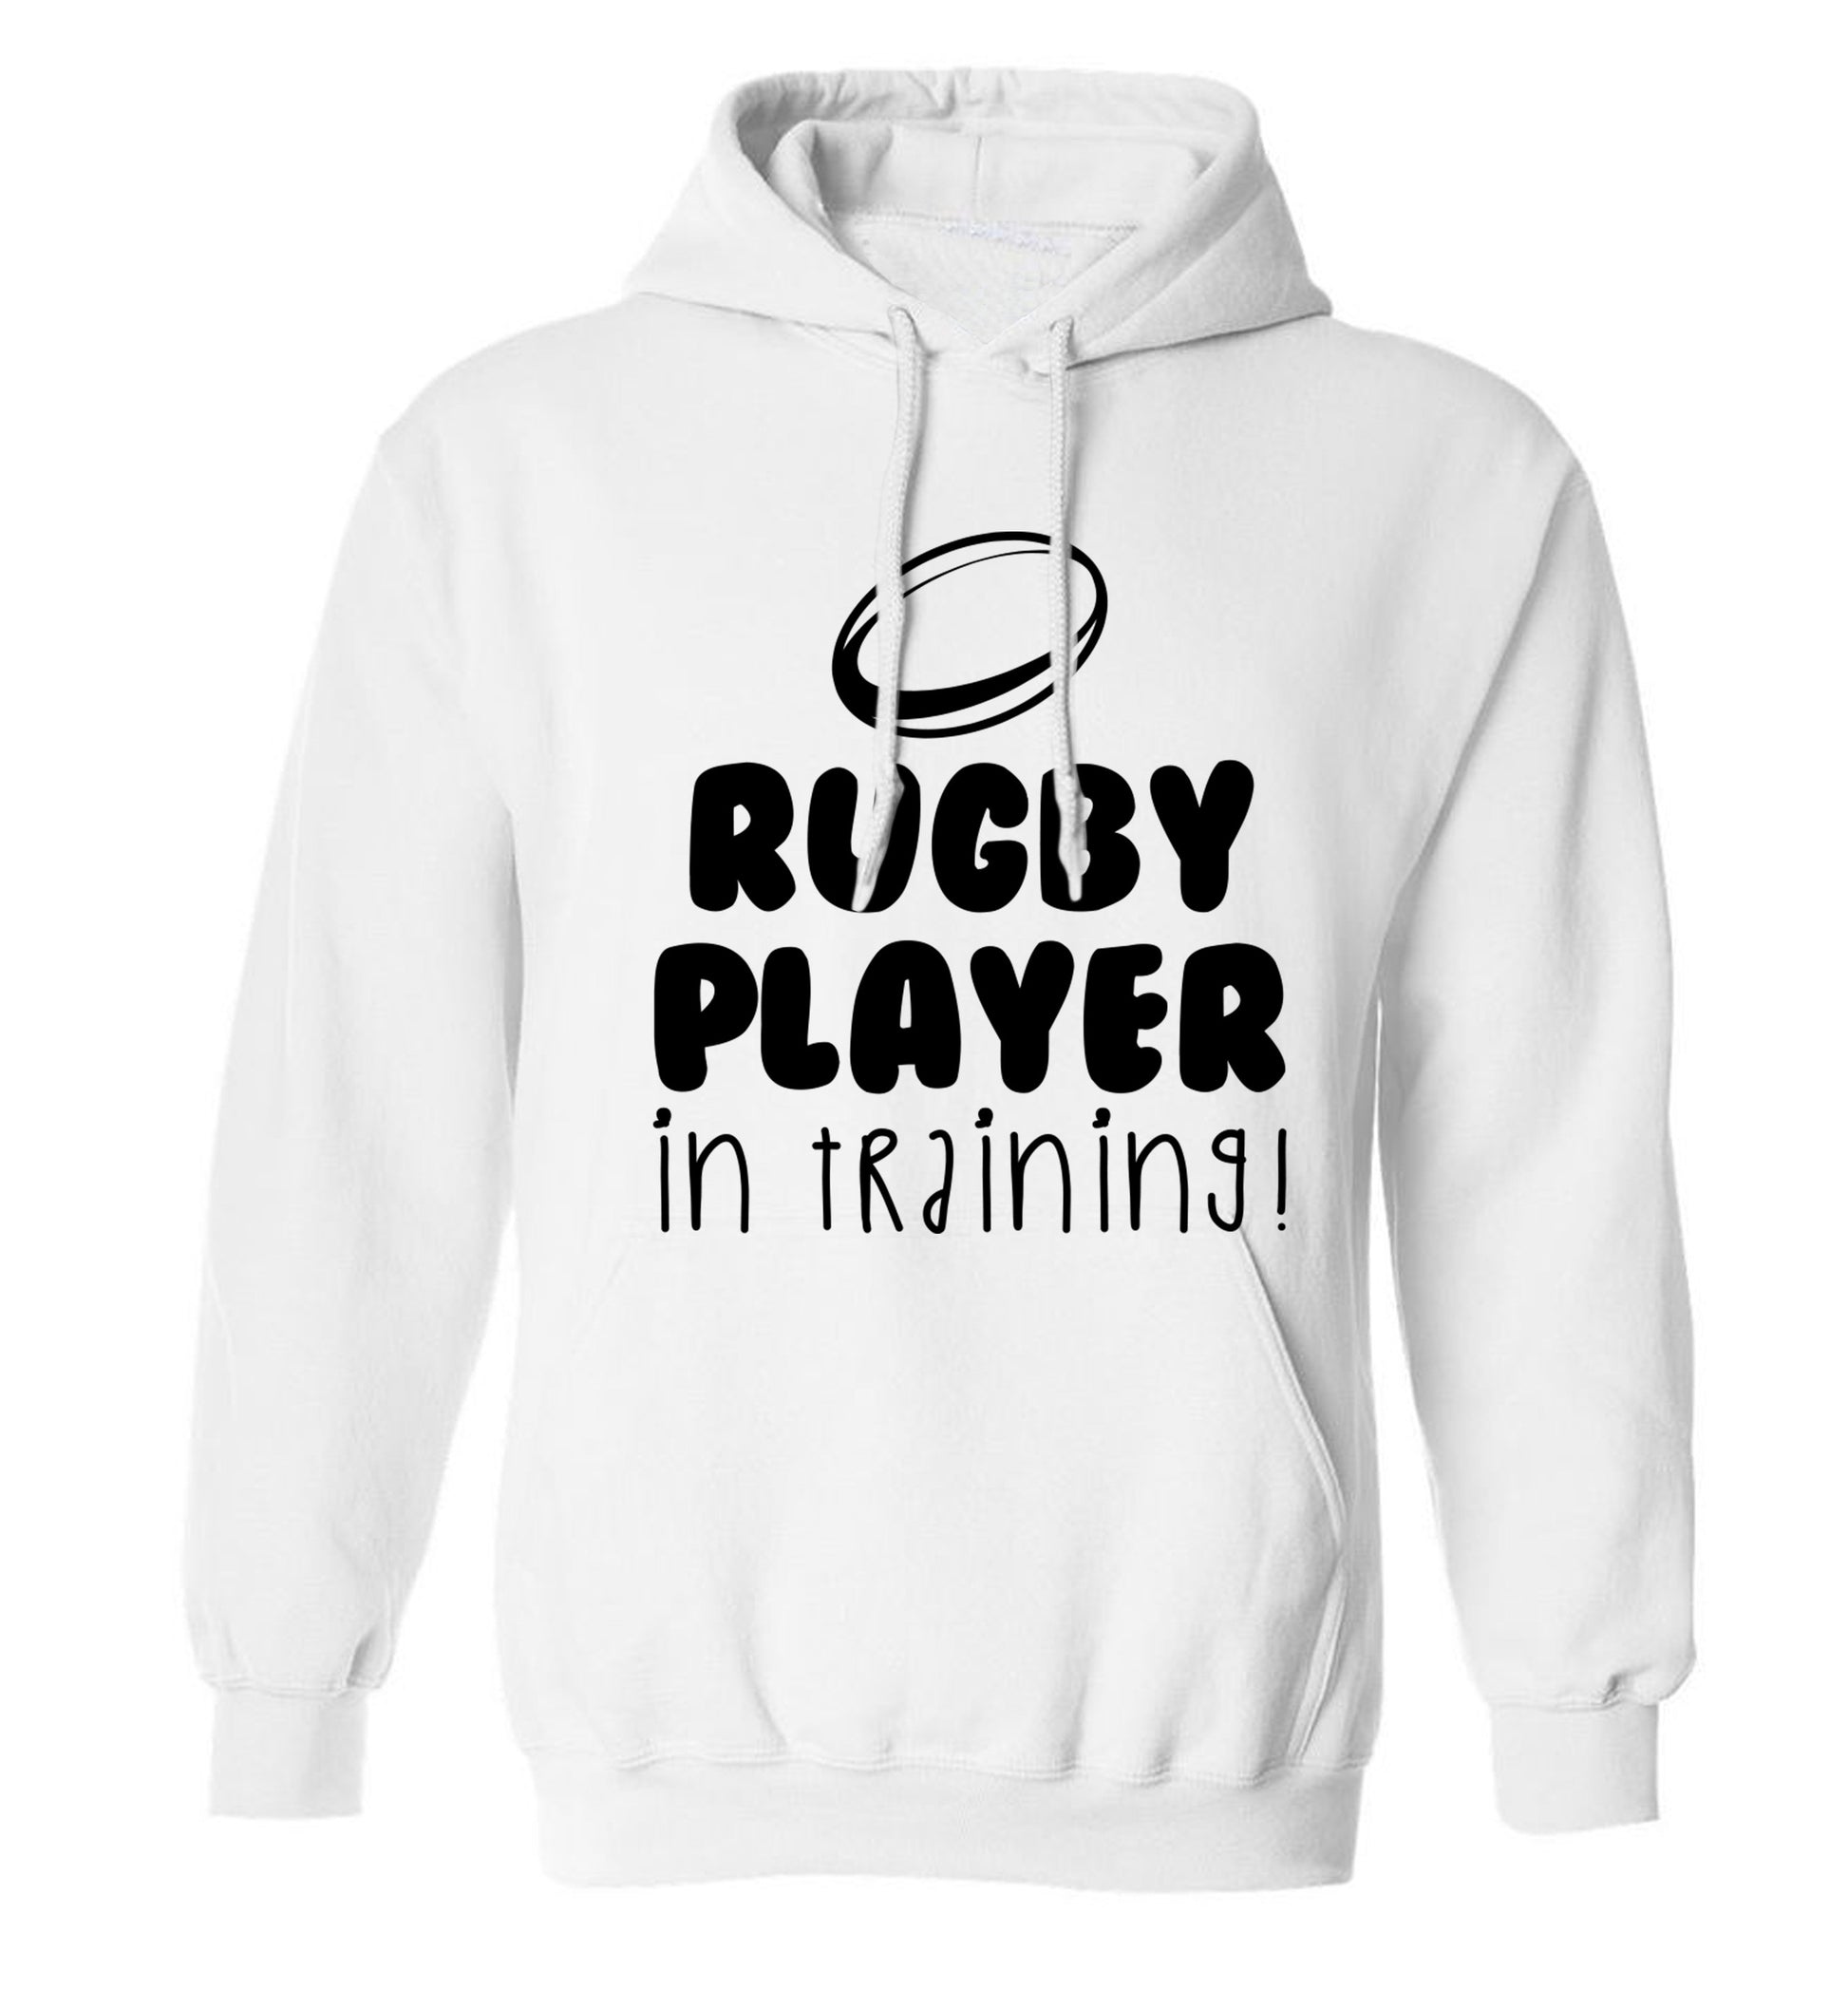 Rugby player in training adults unisex white hoodie 2XL